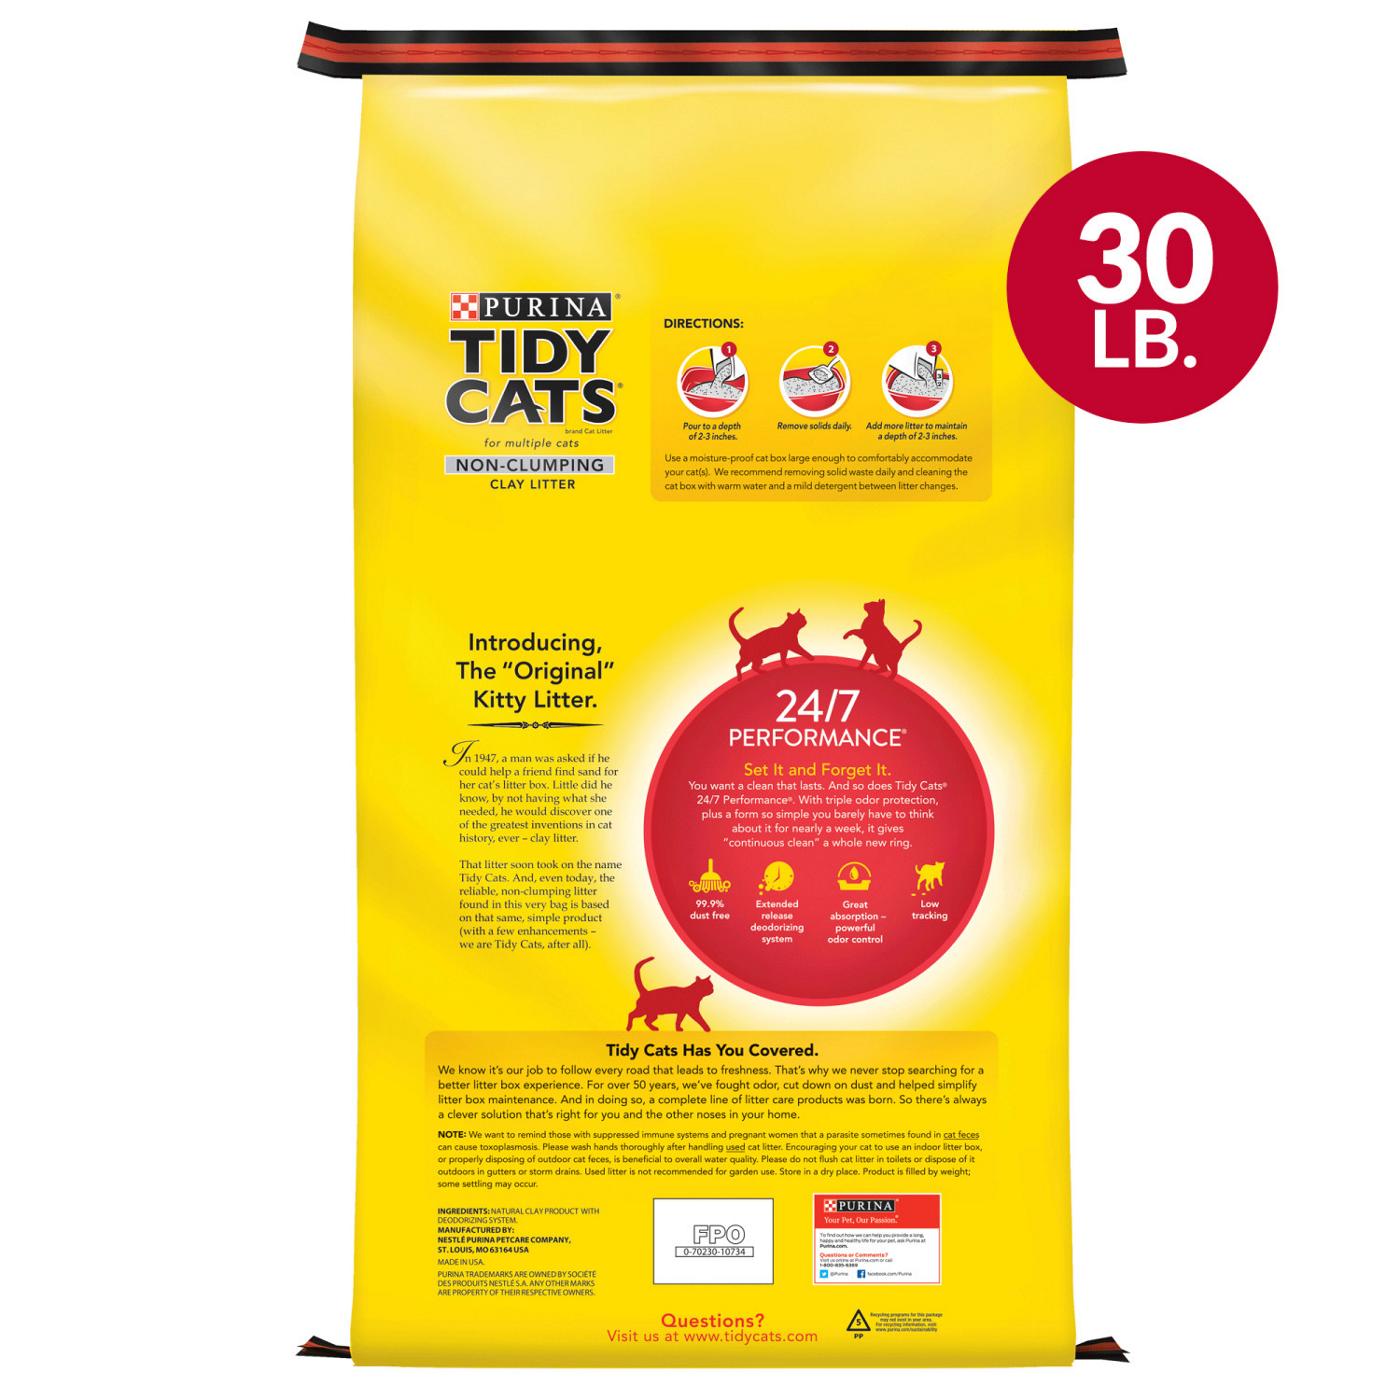 Tidy Cats Purina Tidy Cats Non Clumping Cat Litter, 24/7 Performance Multi Cat Litter; image 3 of 4